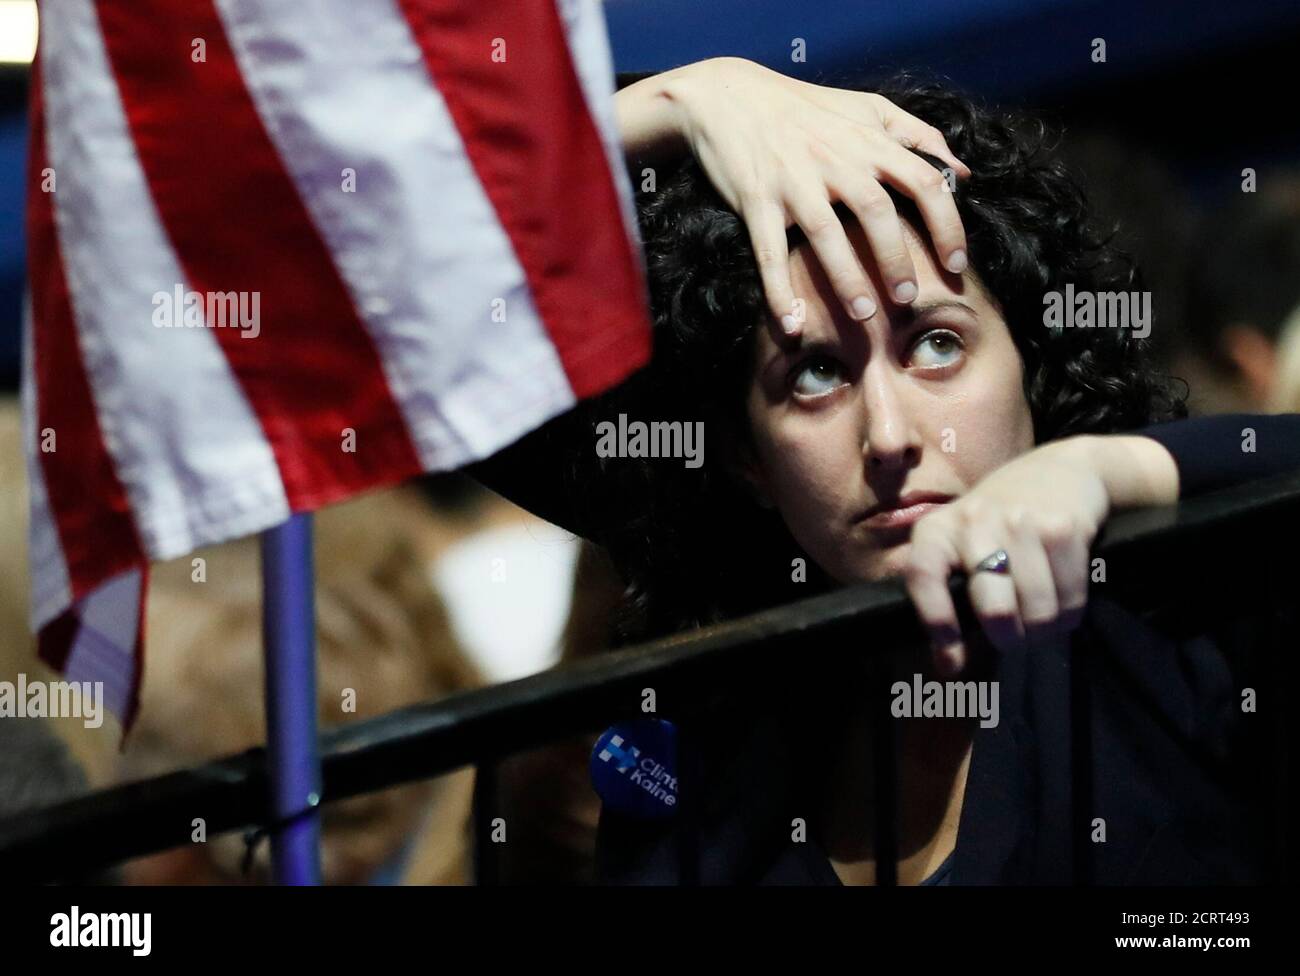 A supporter of Democratic U.S. presidential nominee Hillary Clinton watches results at the election night rally in New York, U.S., November 8, 2016. REUTERS/Rick Wilking Stock Photo